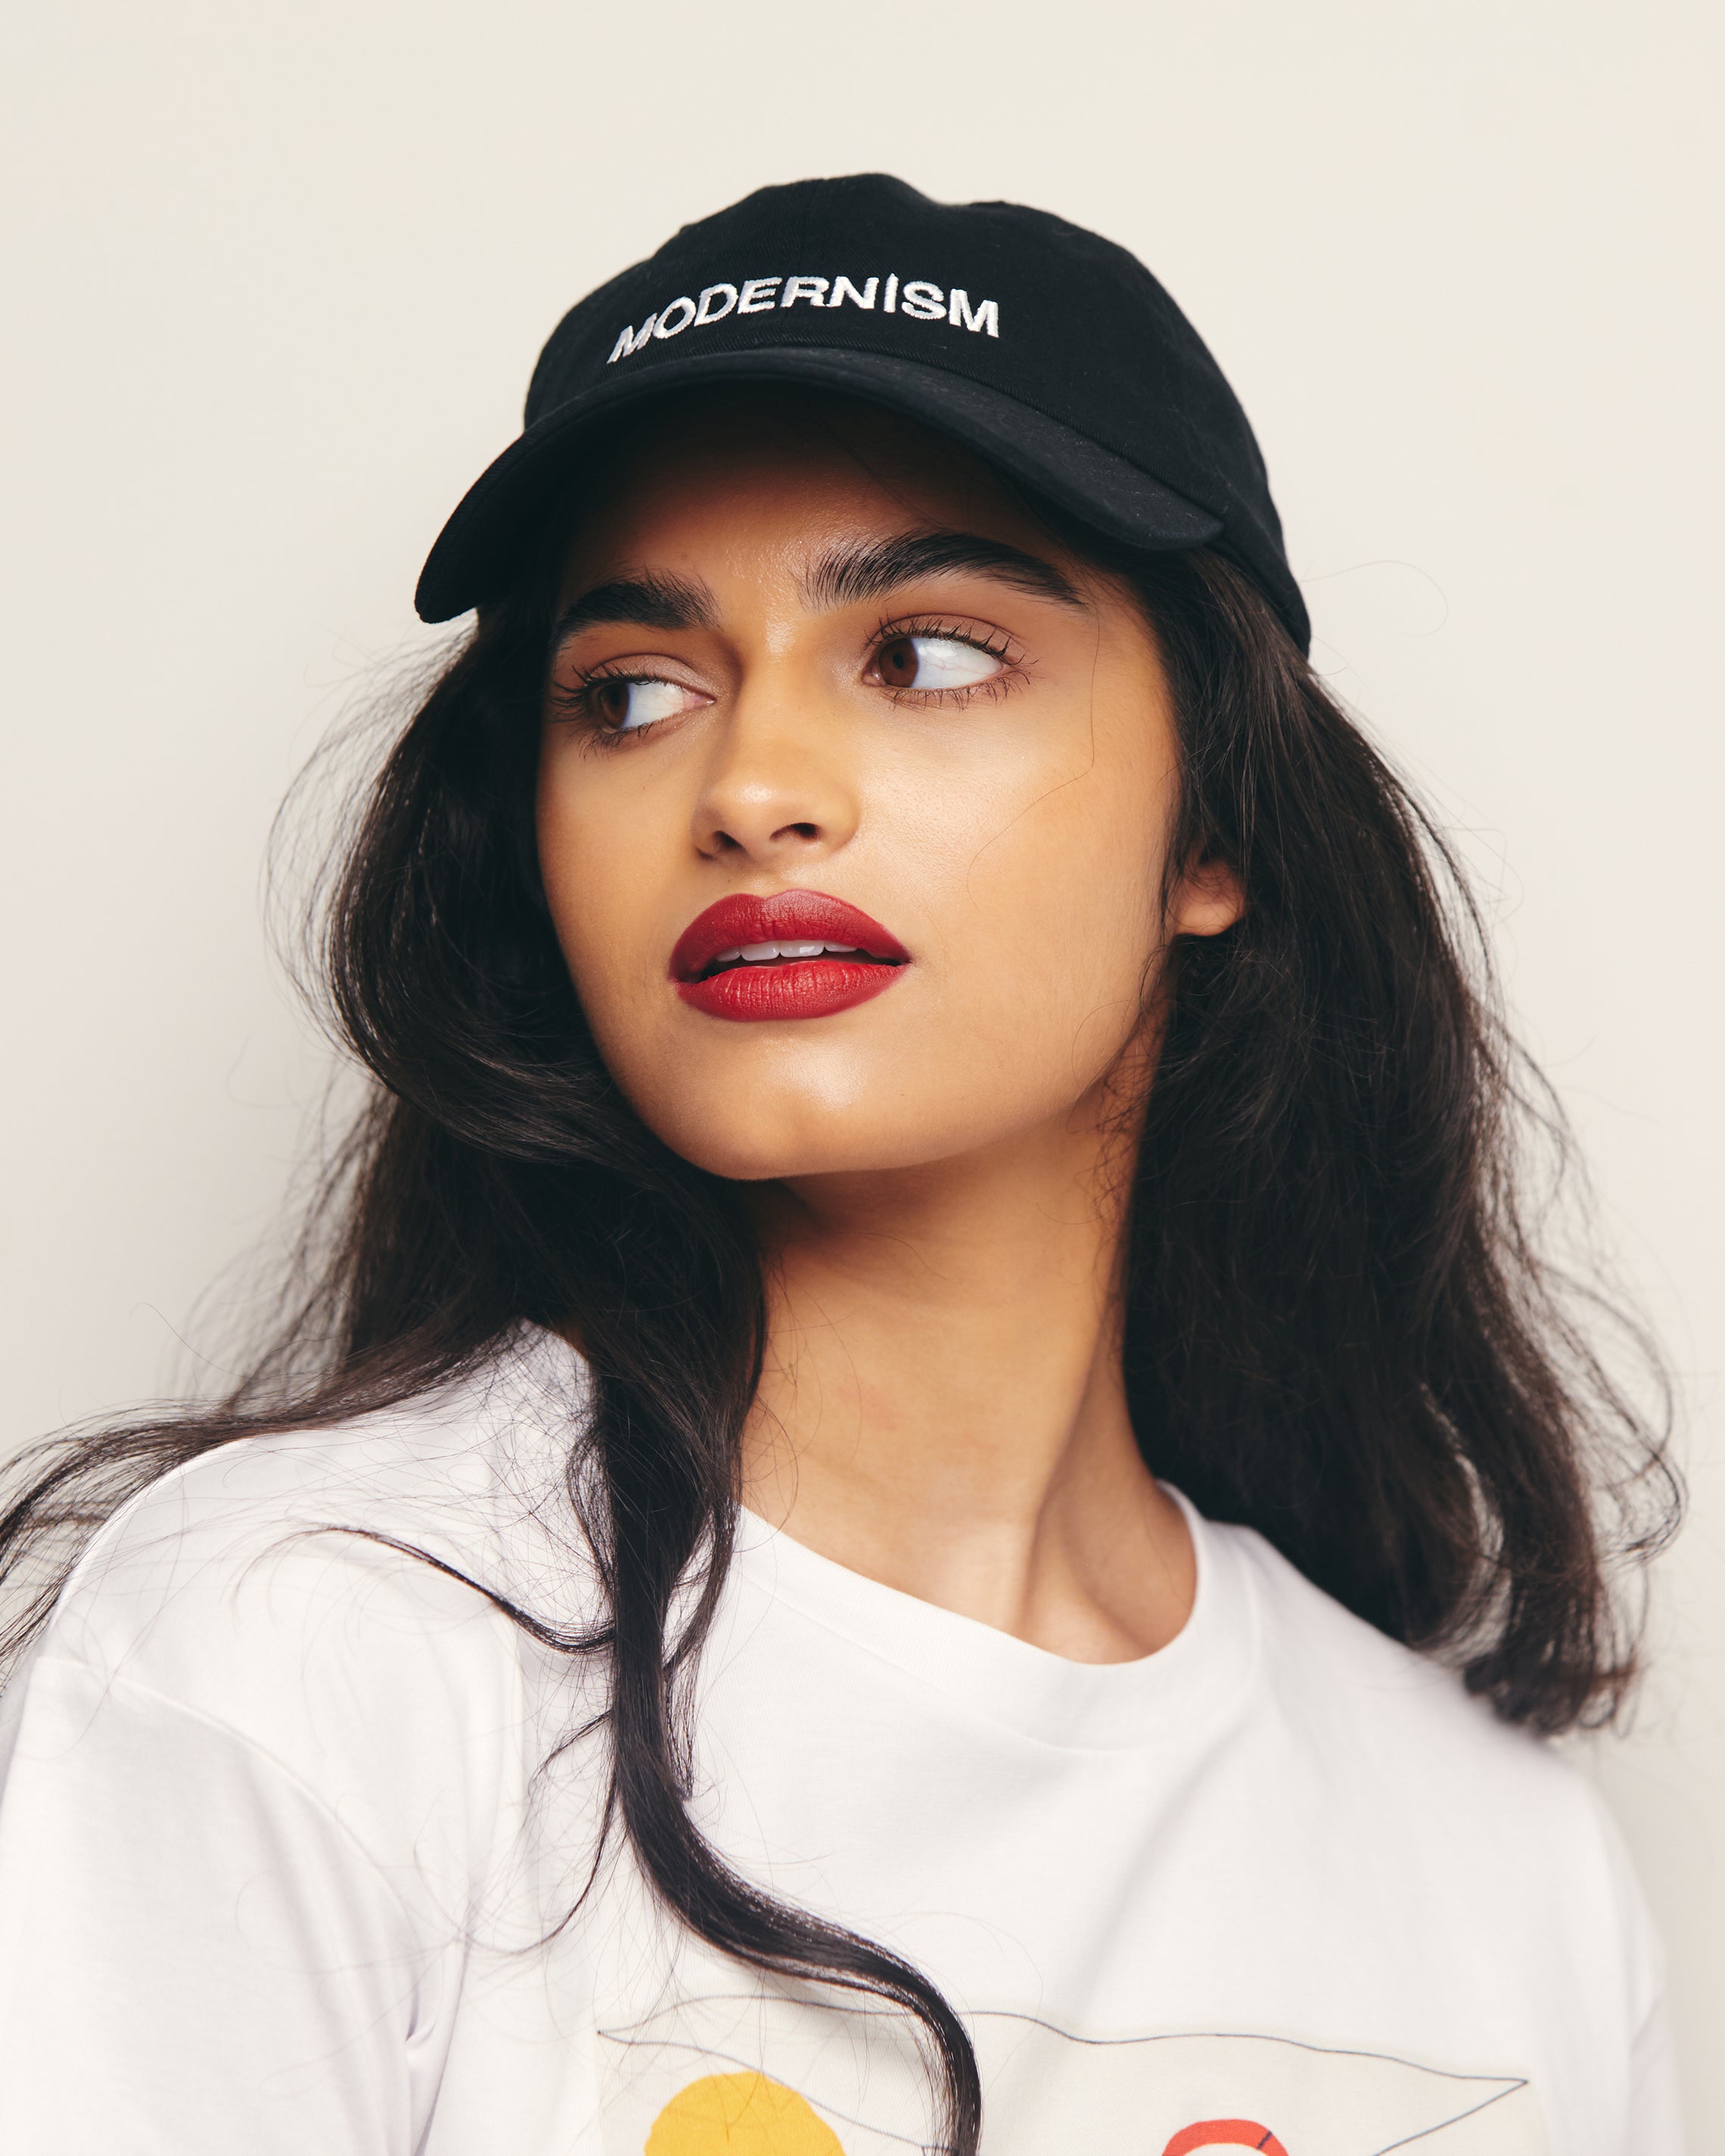 Mira Bhat wears Black Baseball Cap / Dad Hat with Modernism Art Movement Text Embroidery on Front. 100% Cotton.